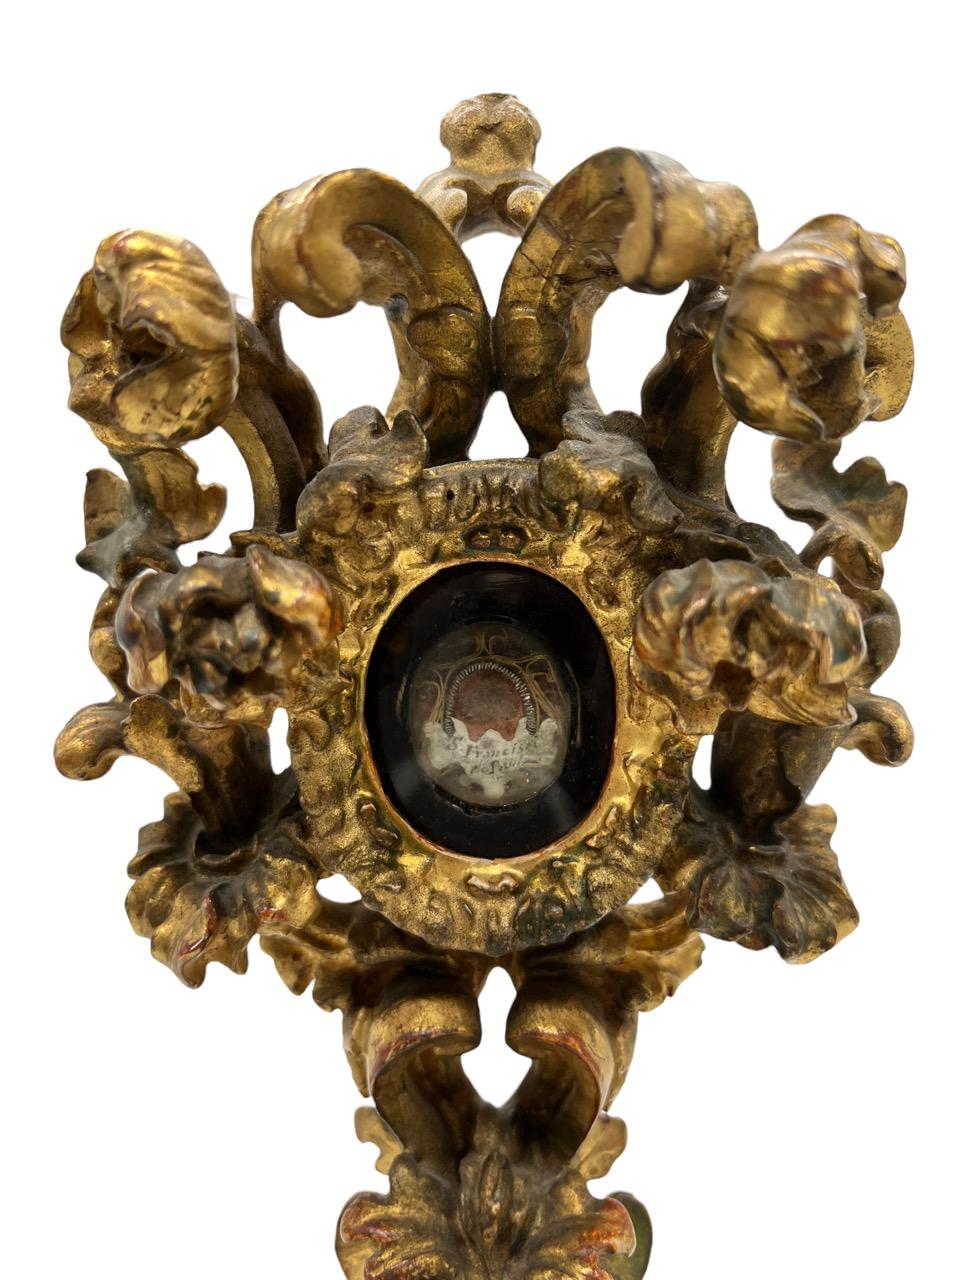 Rococo Opulent 18th Century Baroque Reliquary of Blood of Saint St. Francis '15th Cent'